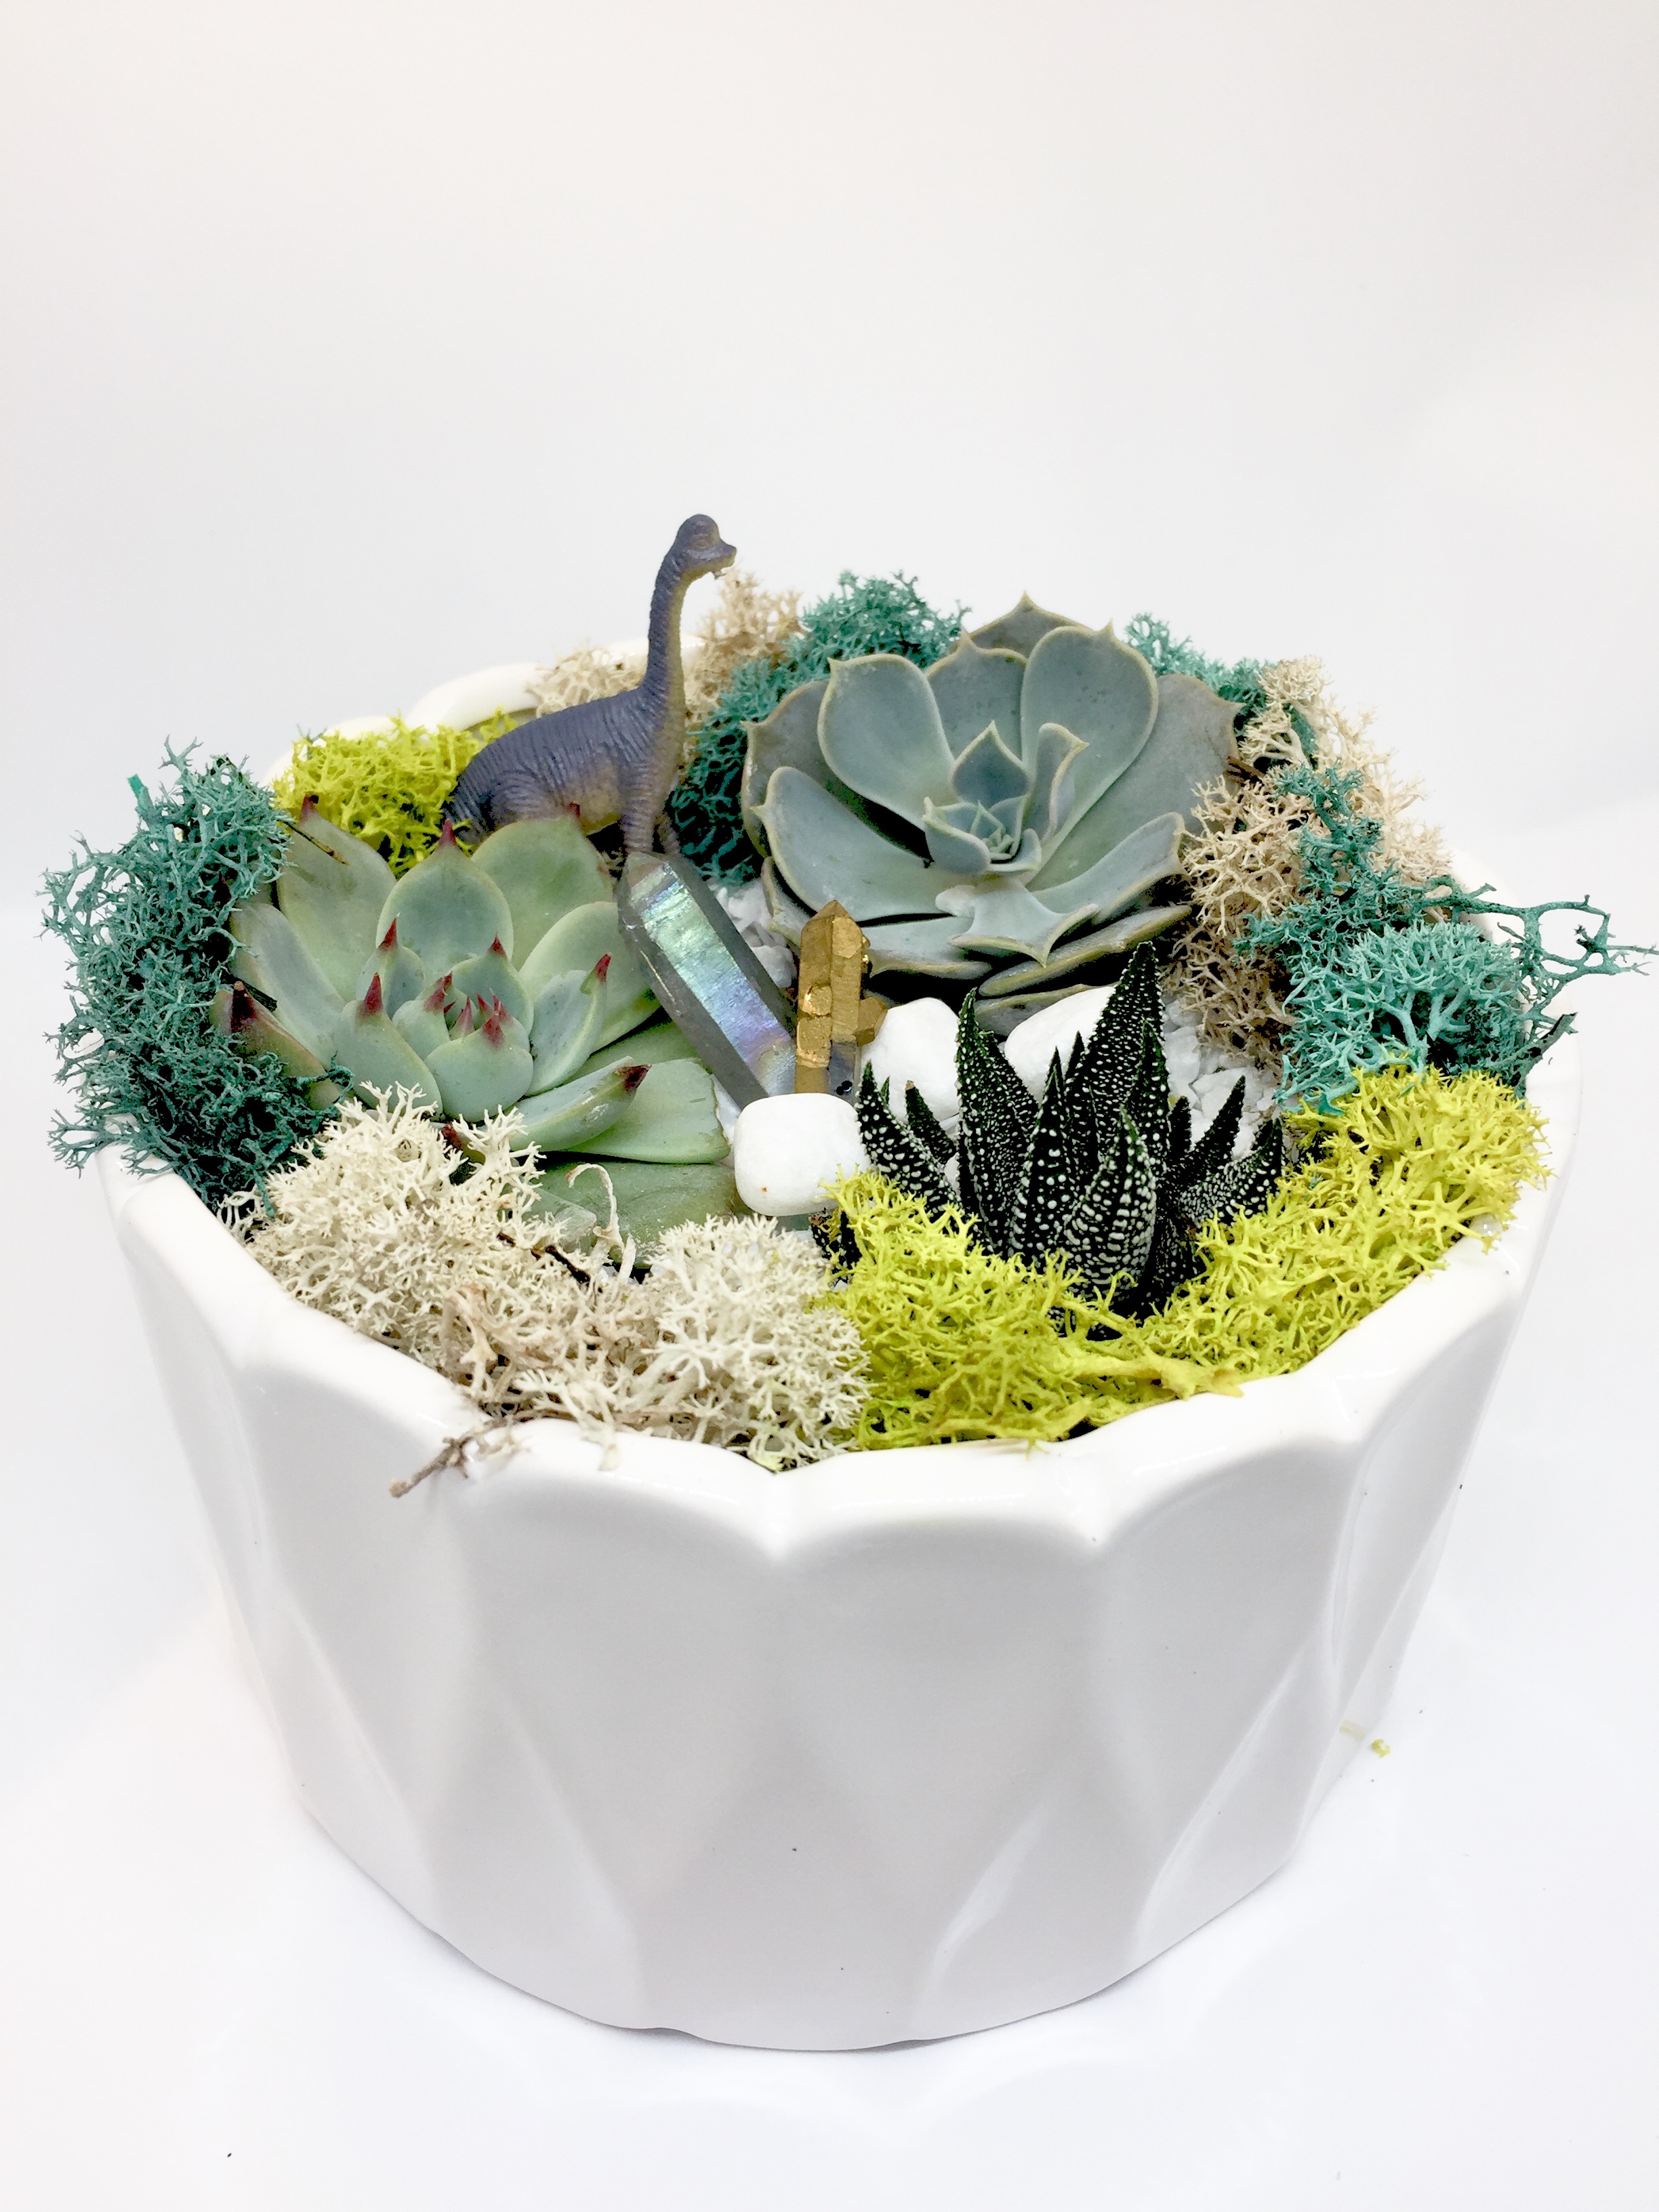 A Dino Crystal Garden  White Round Ceramic plant nite project by Yaymaker